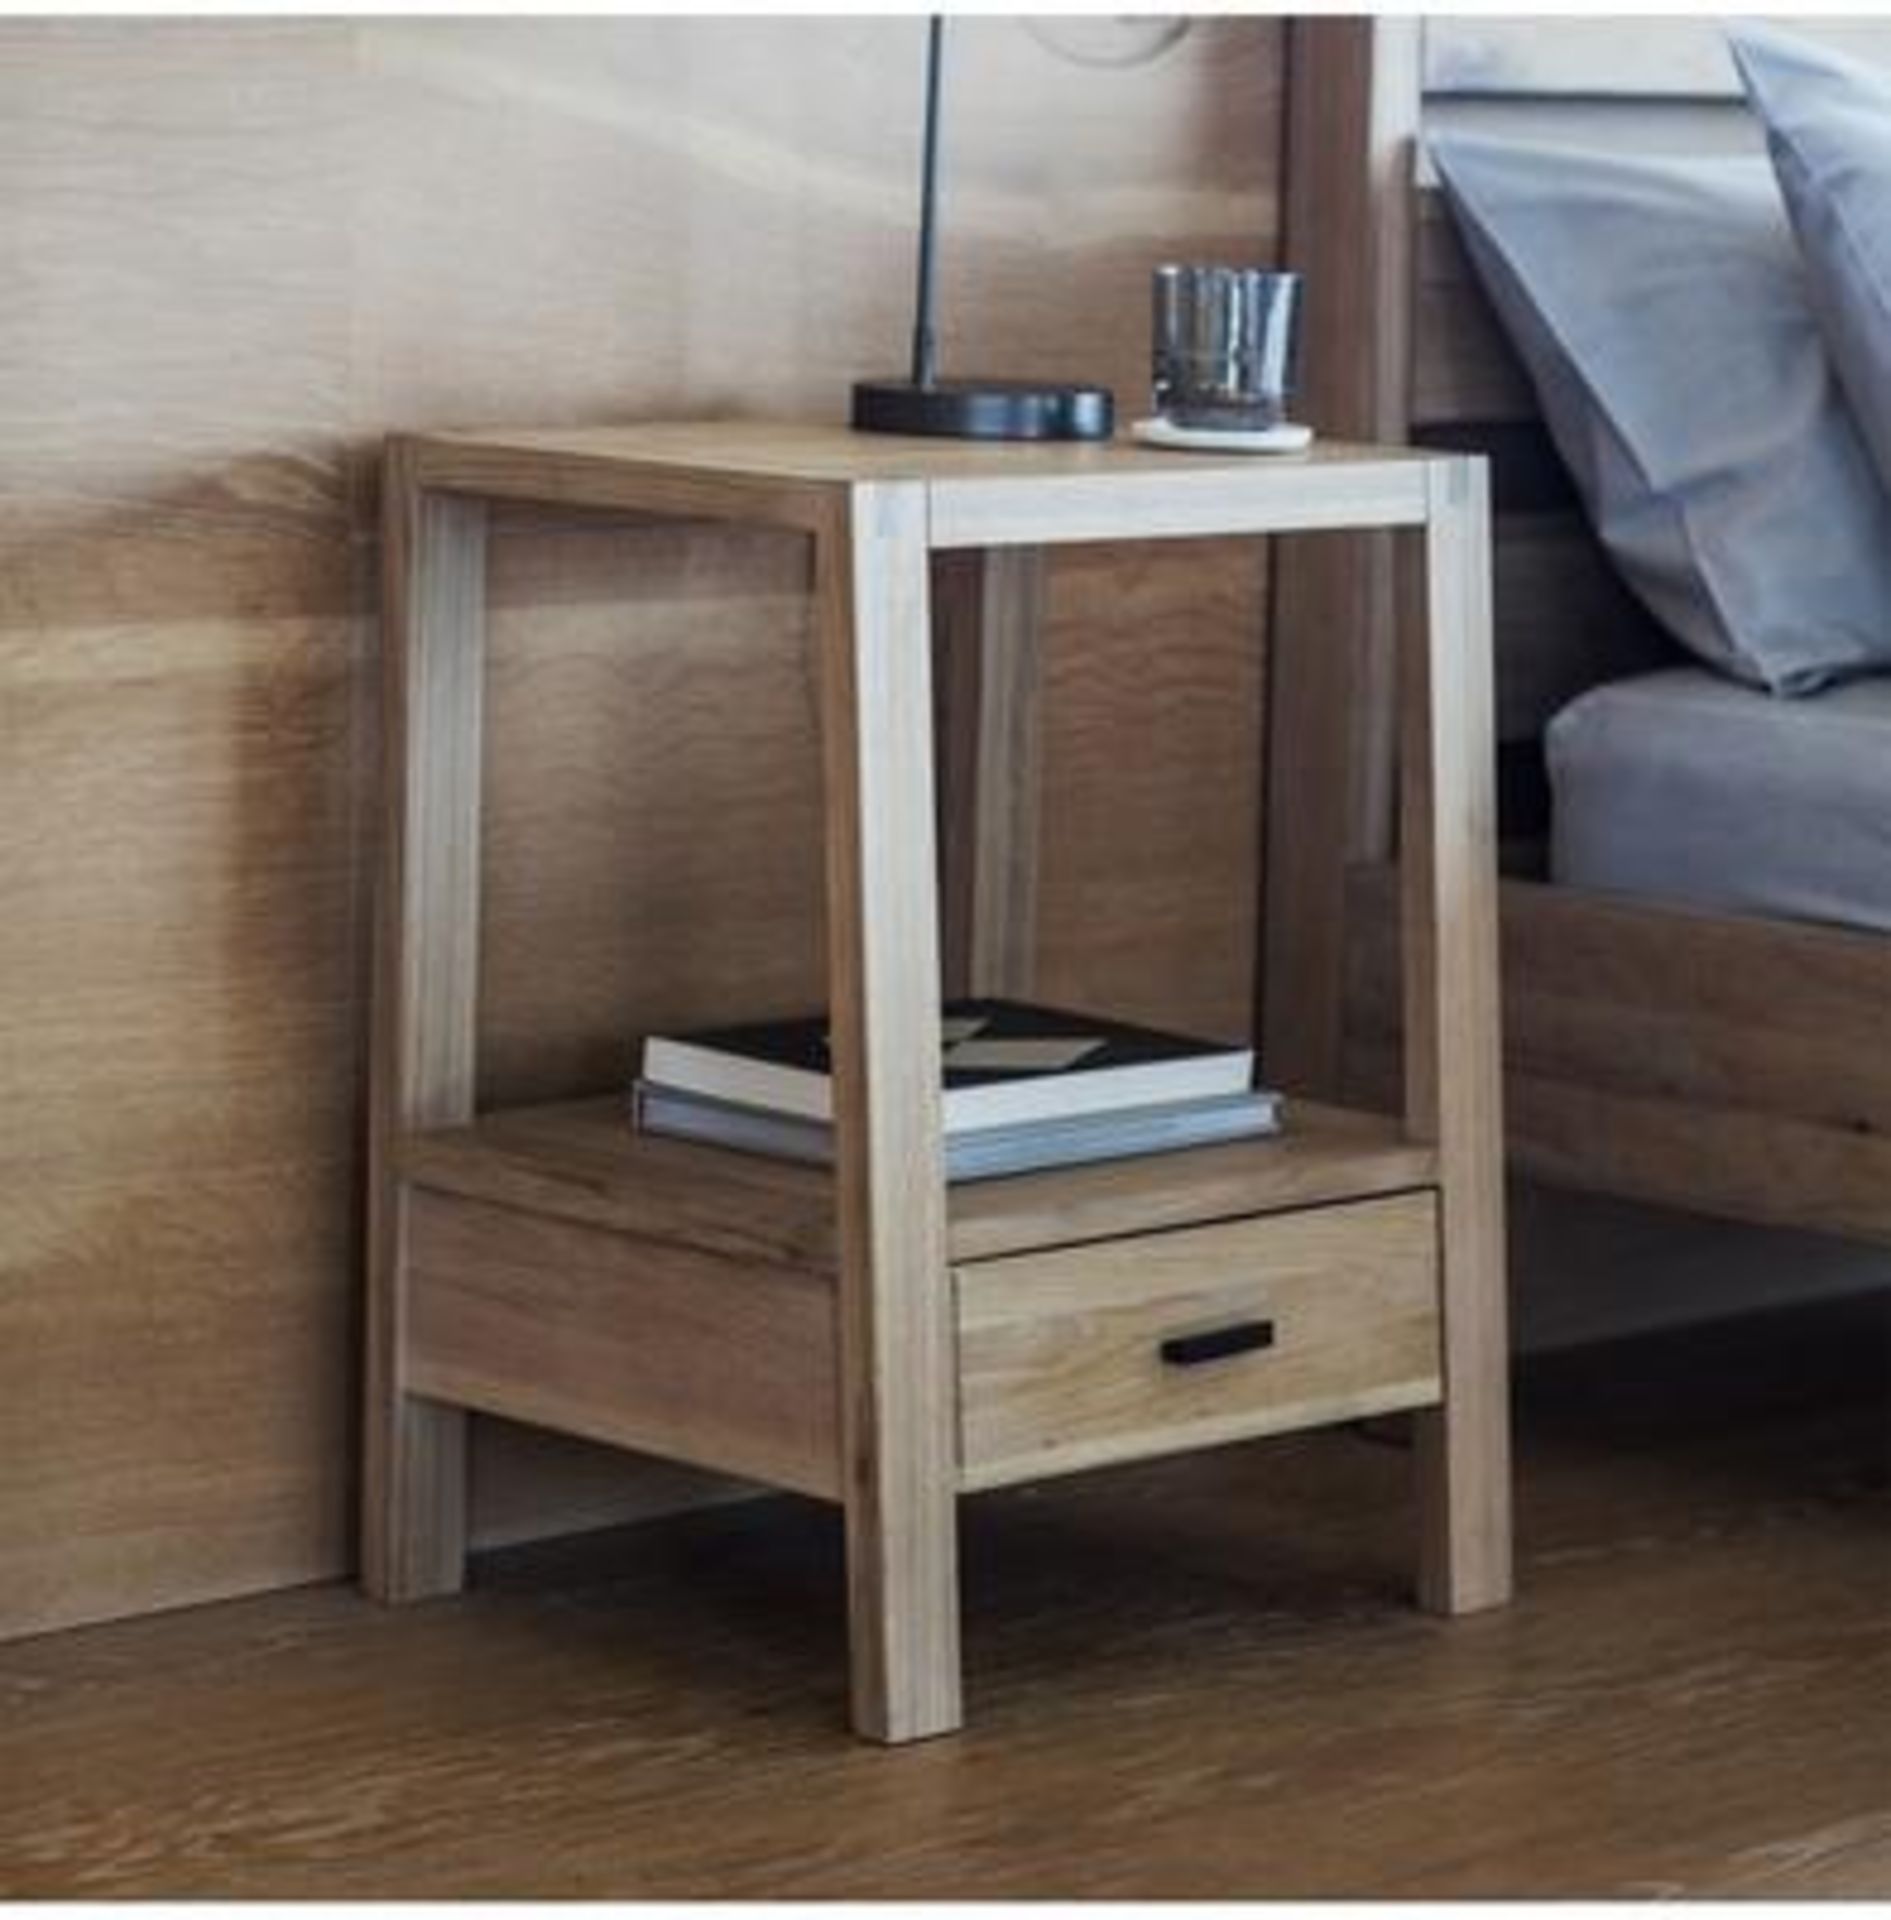 Kielder Bedside Side Table Honest And Solid, The Kielder Range Is Crafted From Beautiful Mellow